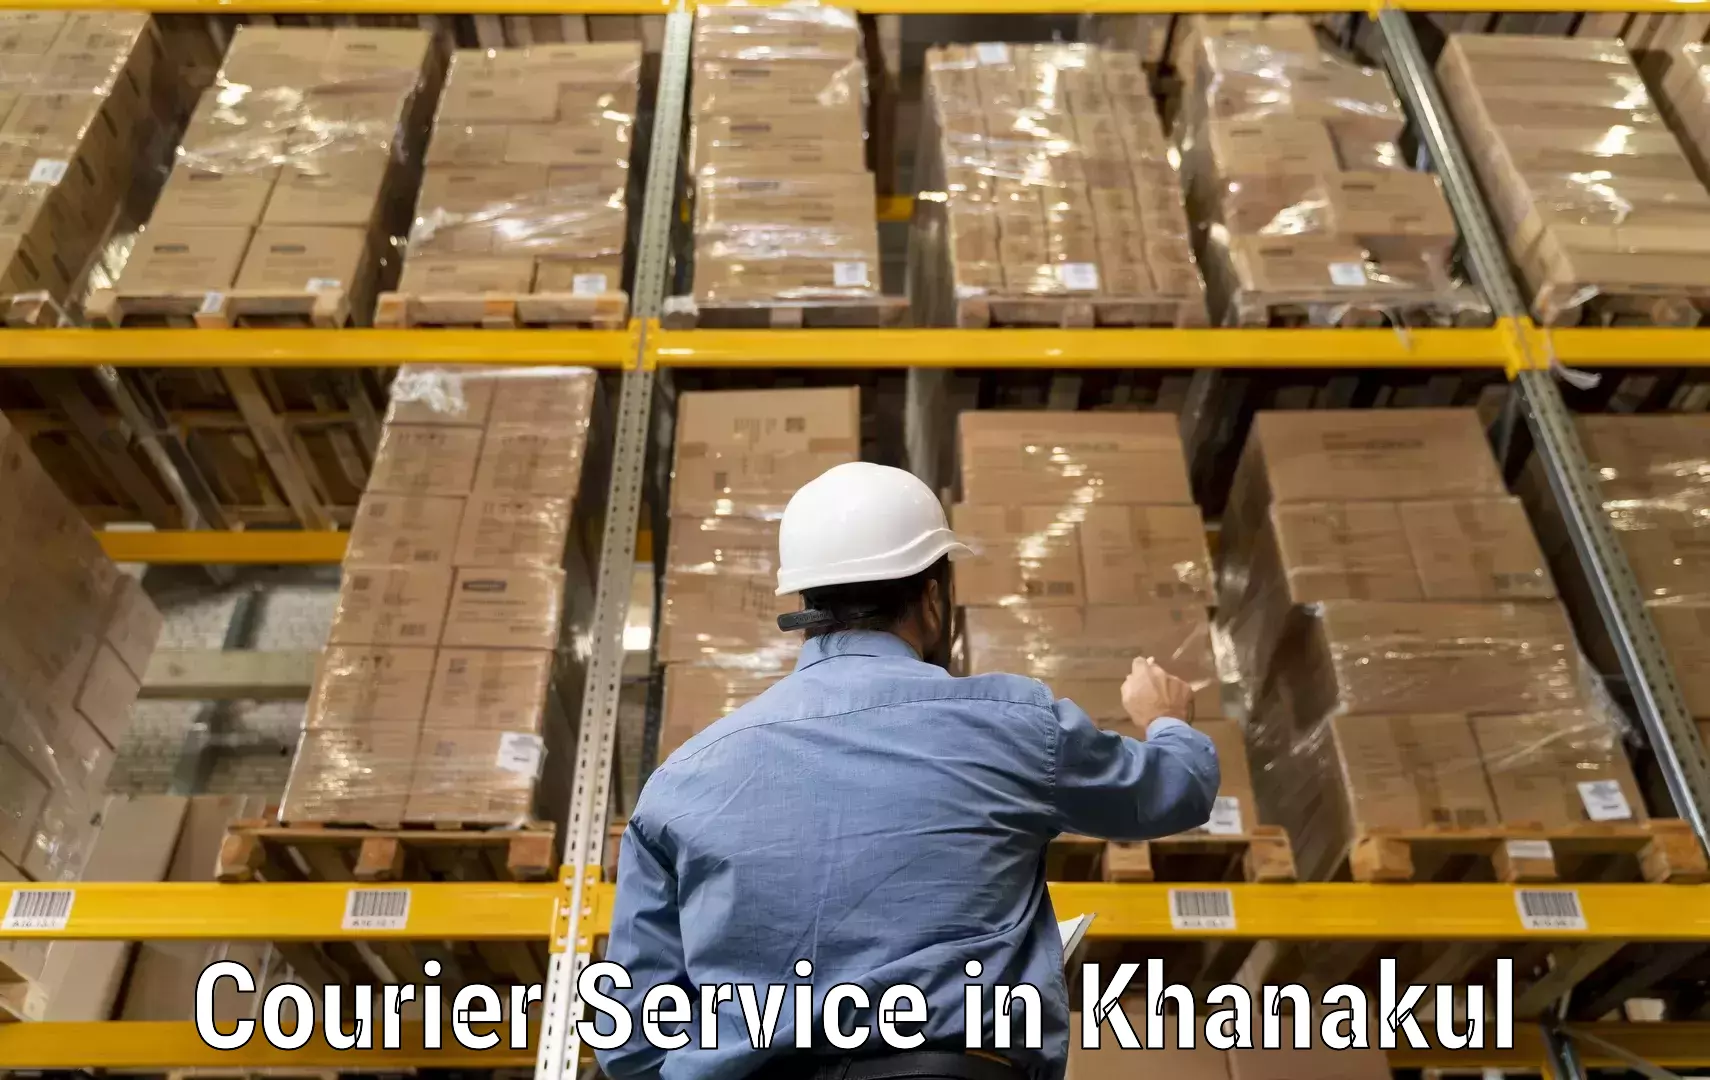 Personal parcel delivery in Khanakul